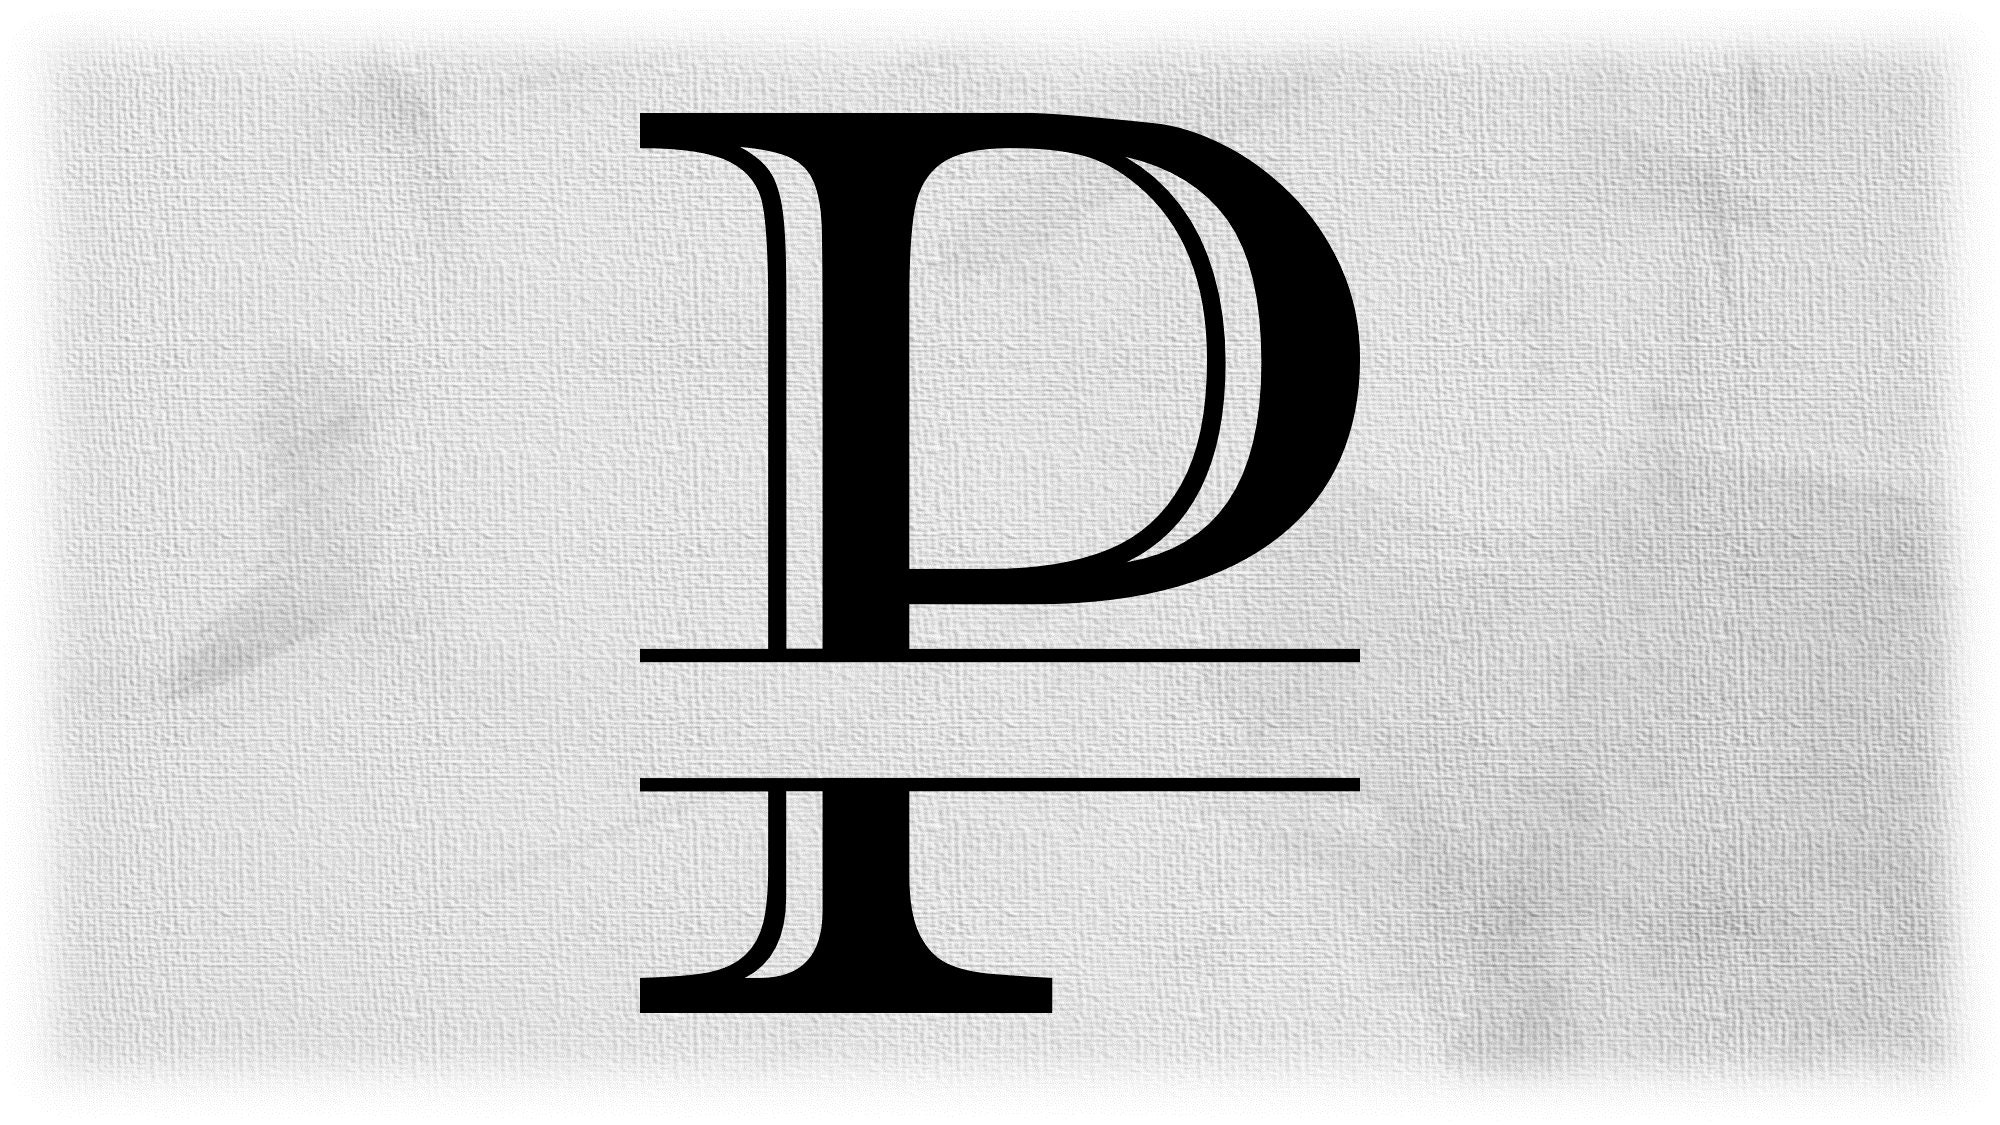 Combination Logo From Letter P With S Logo Design Concept Royalty Free SVG,  Cliparts, Vectors, and Stock Illustration. Image 136990741.